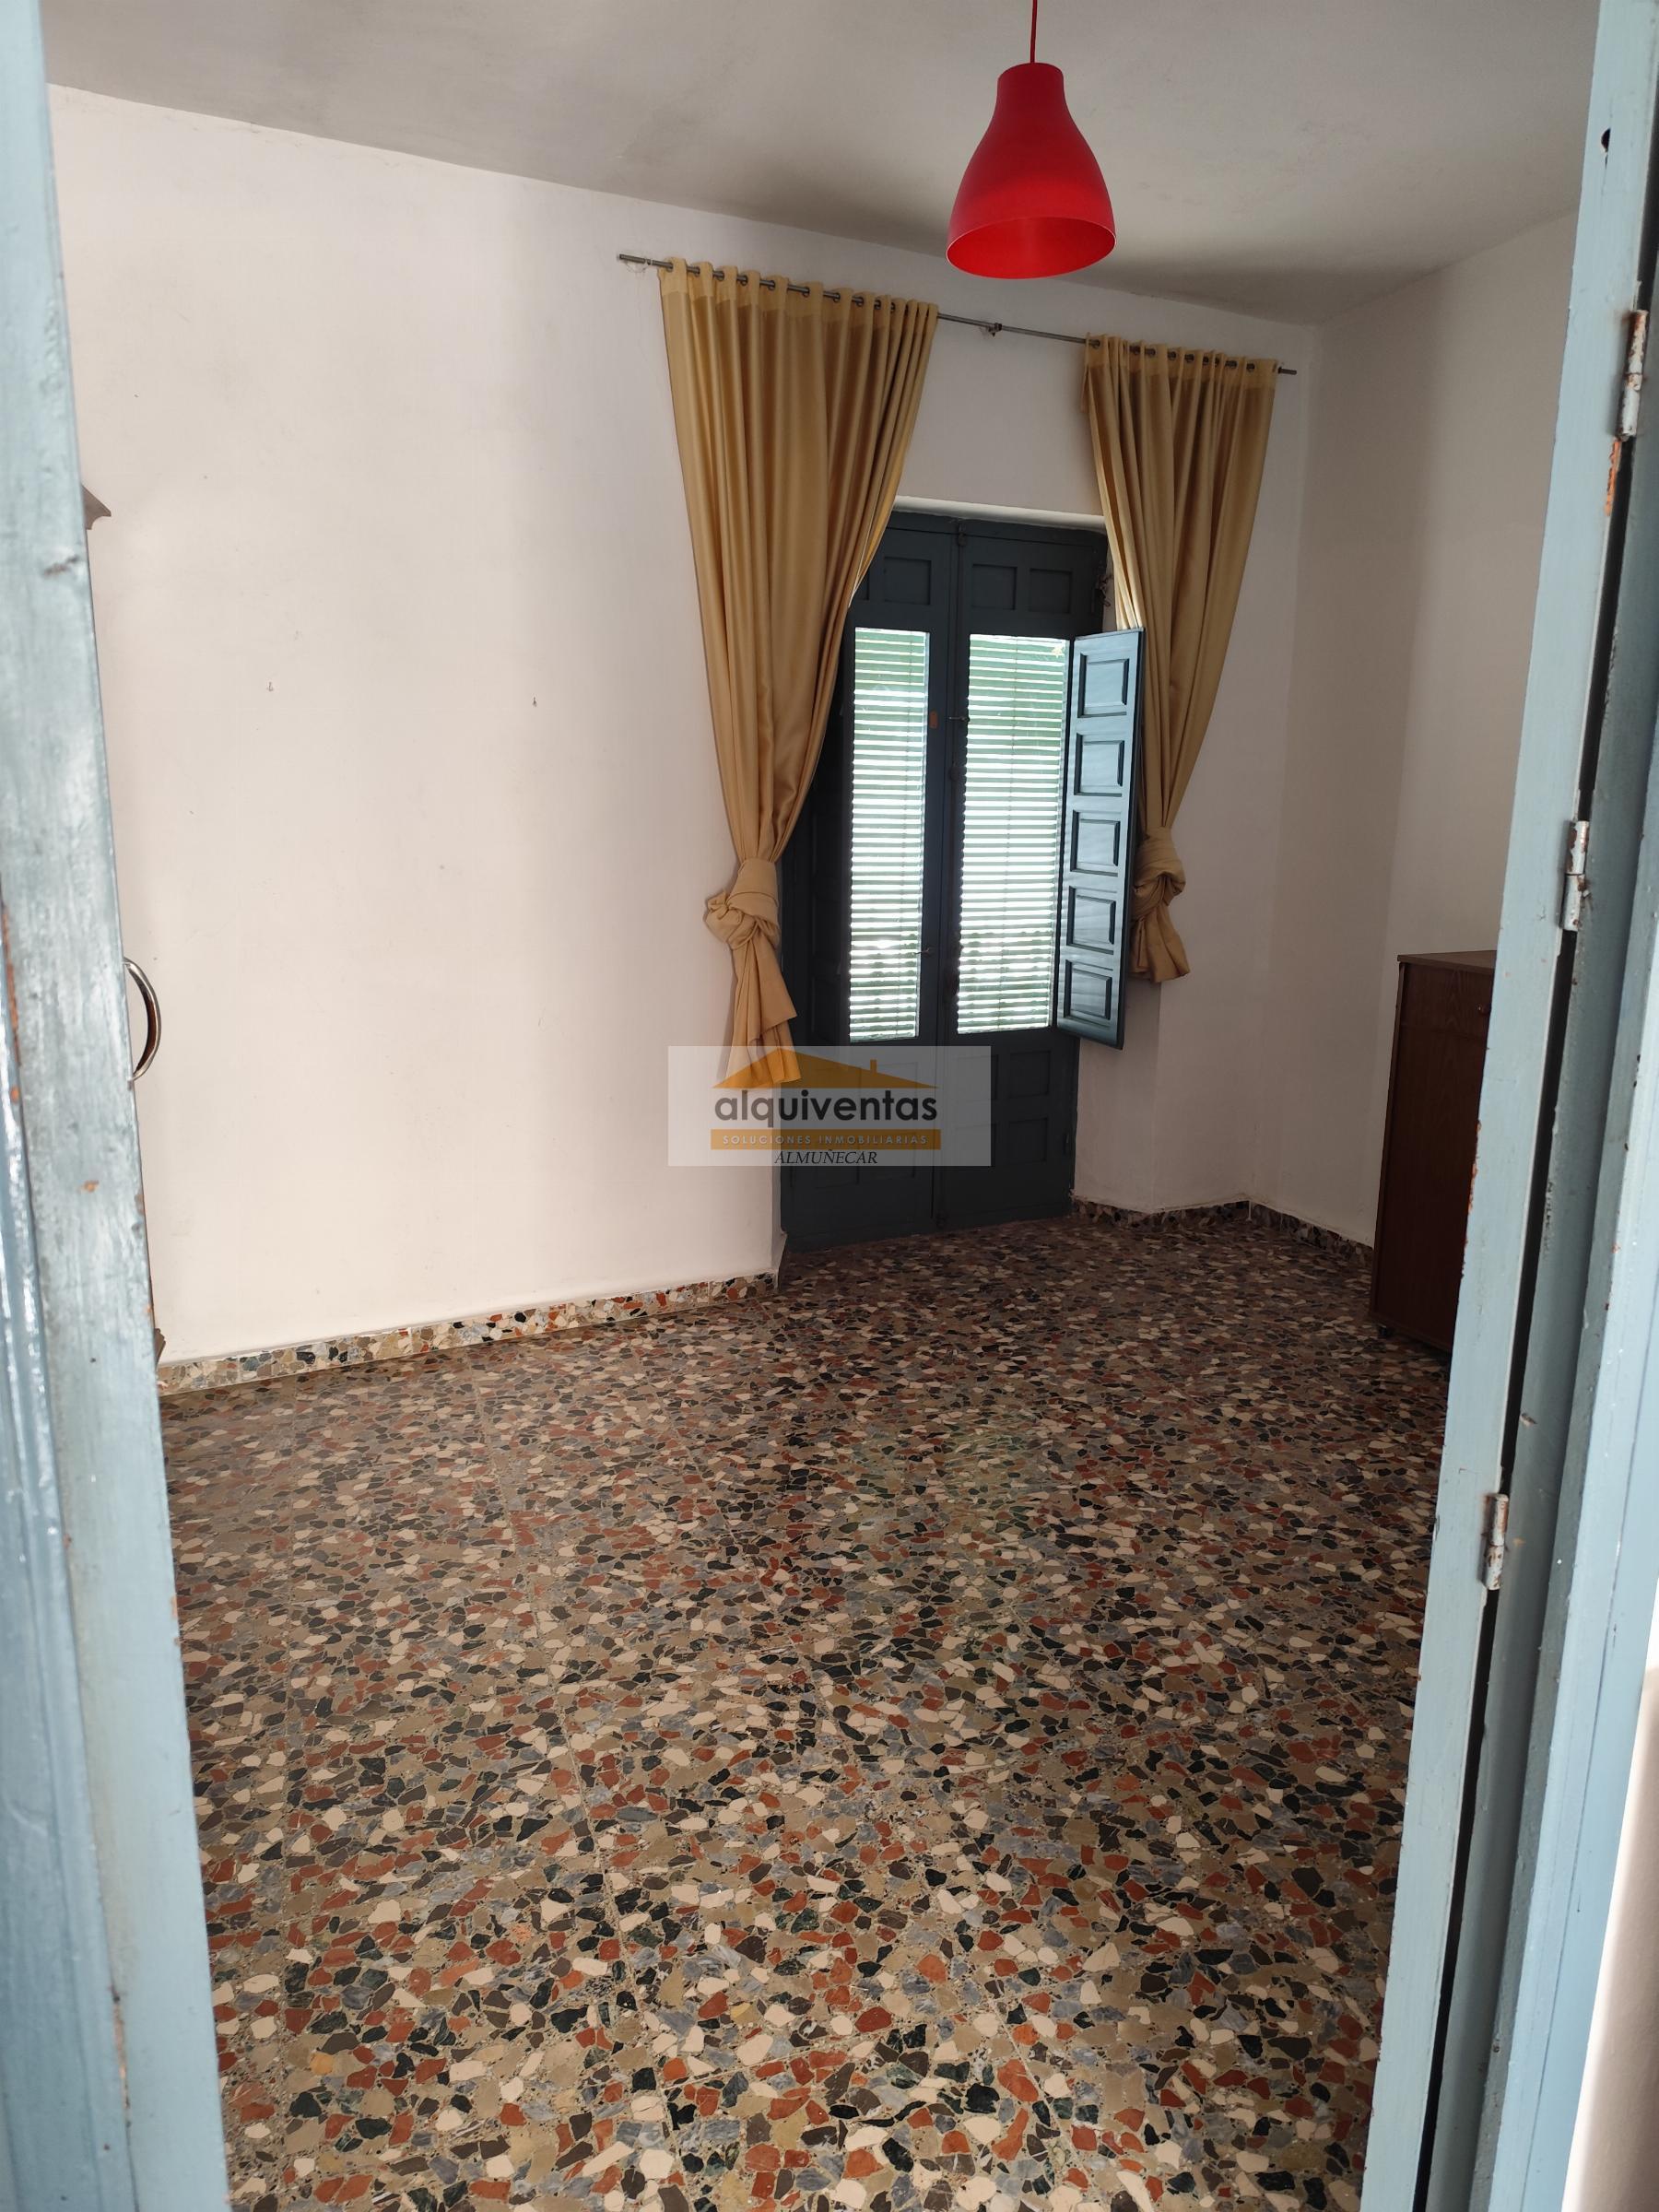 For sale of house in Jete